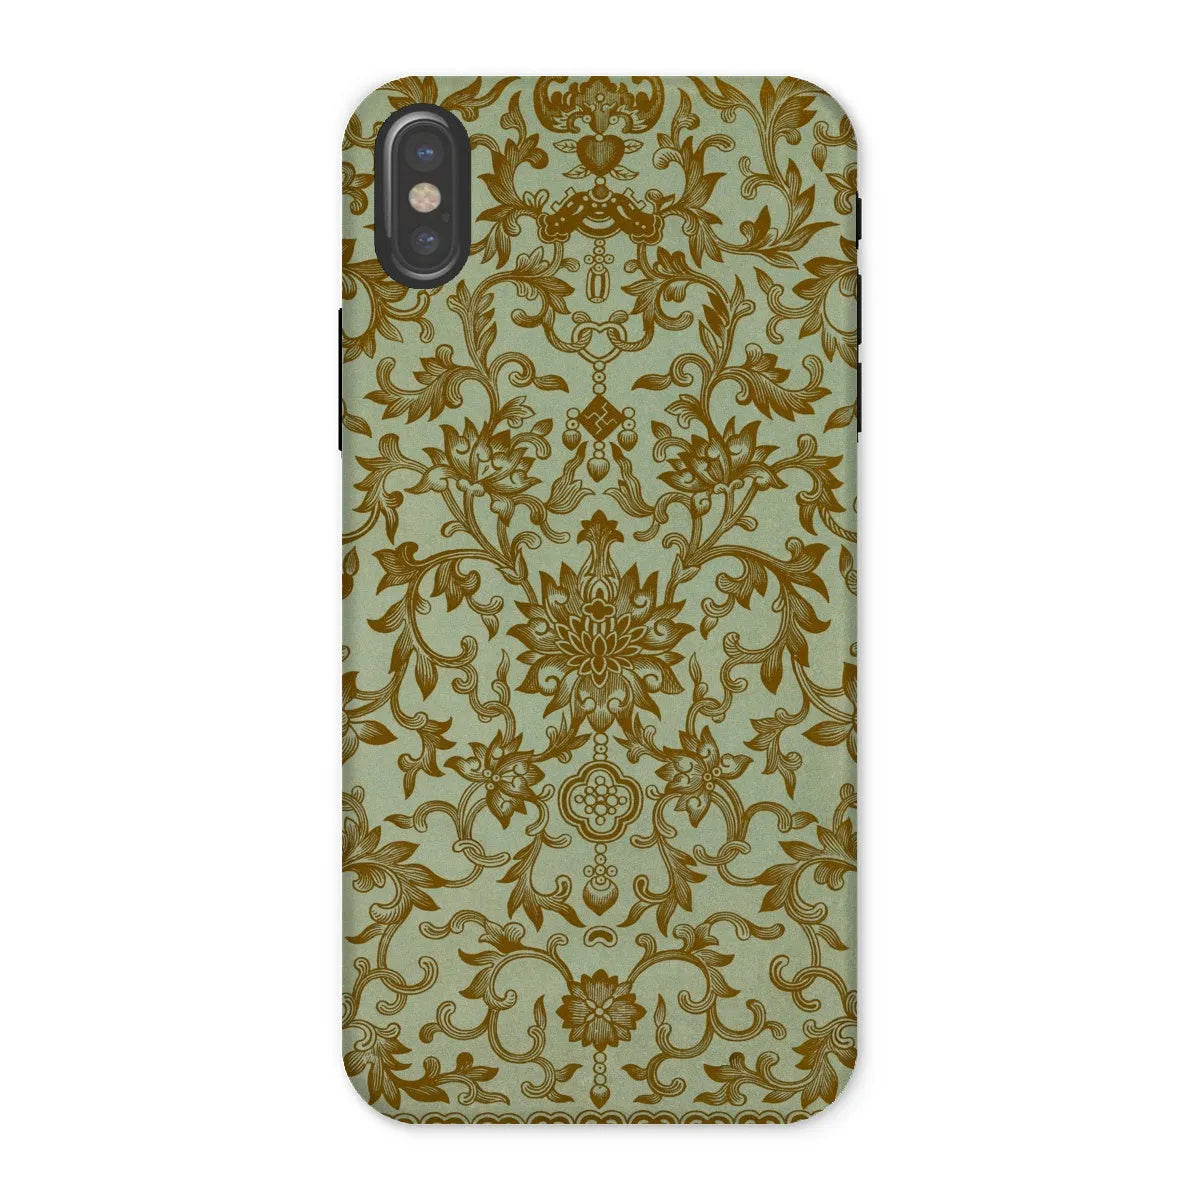 Earthy Chinese Floral Art Pattern Phone Case - Owen Jones - Iphone x / Matte - Mobile Phone Cases - Aesthetic Art